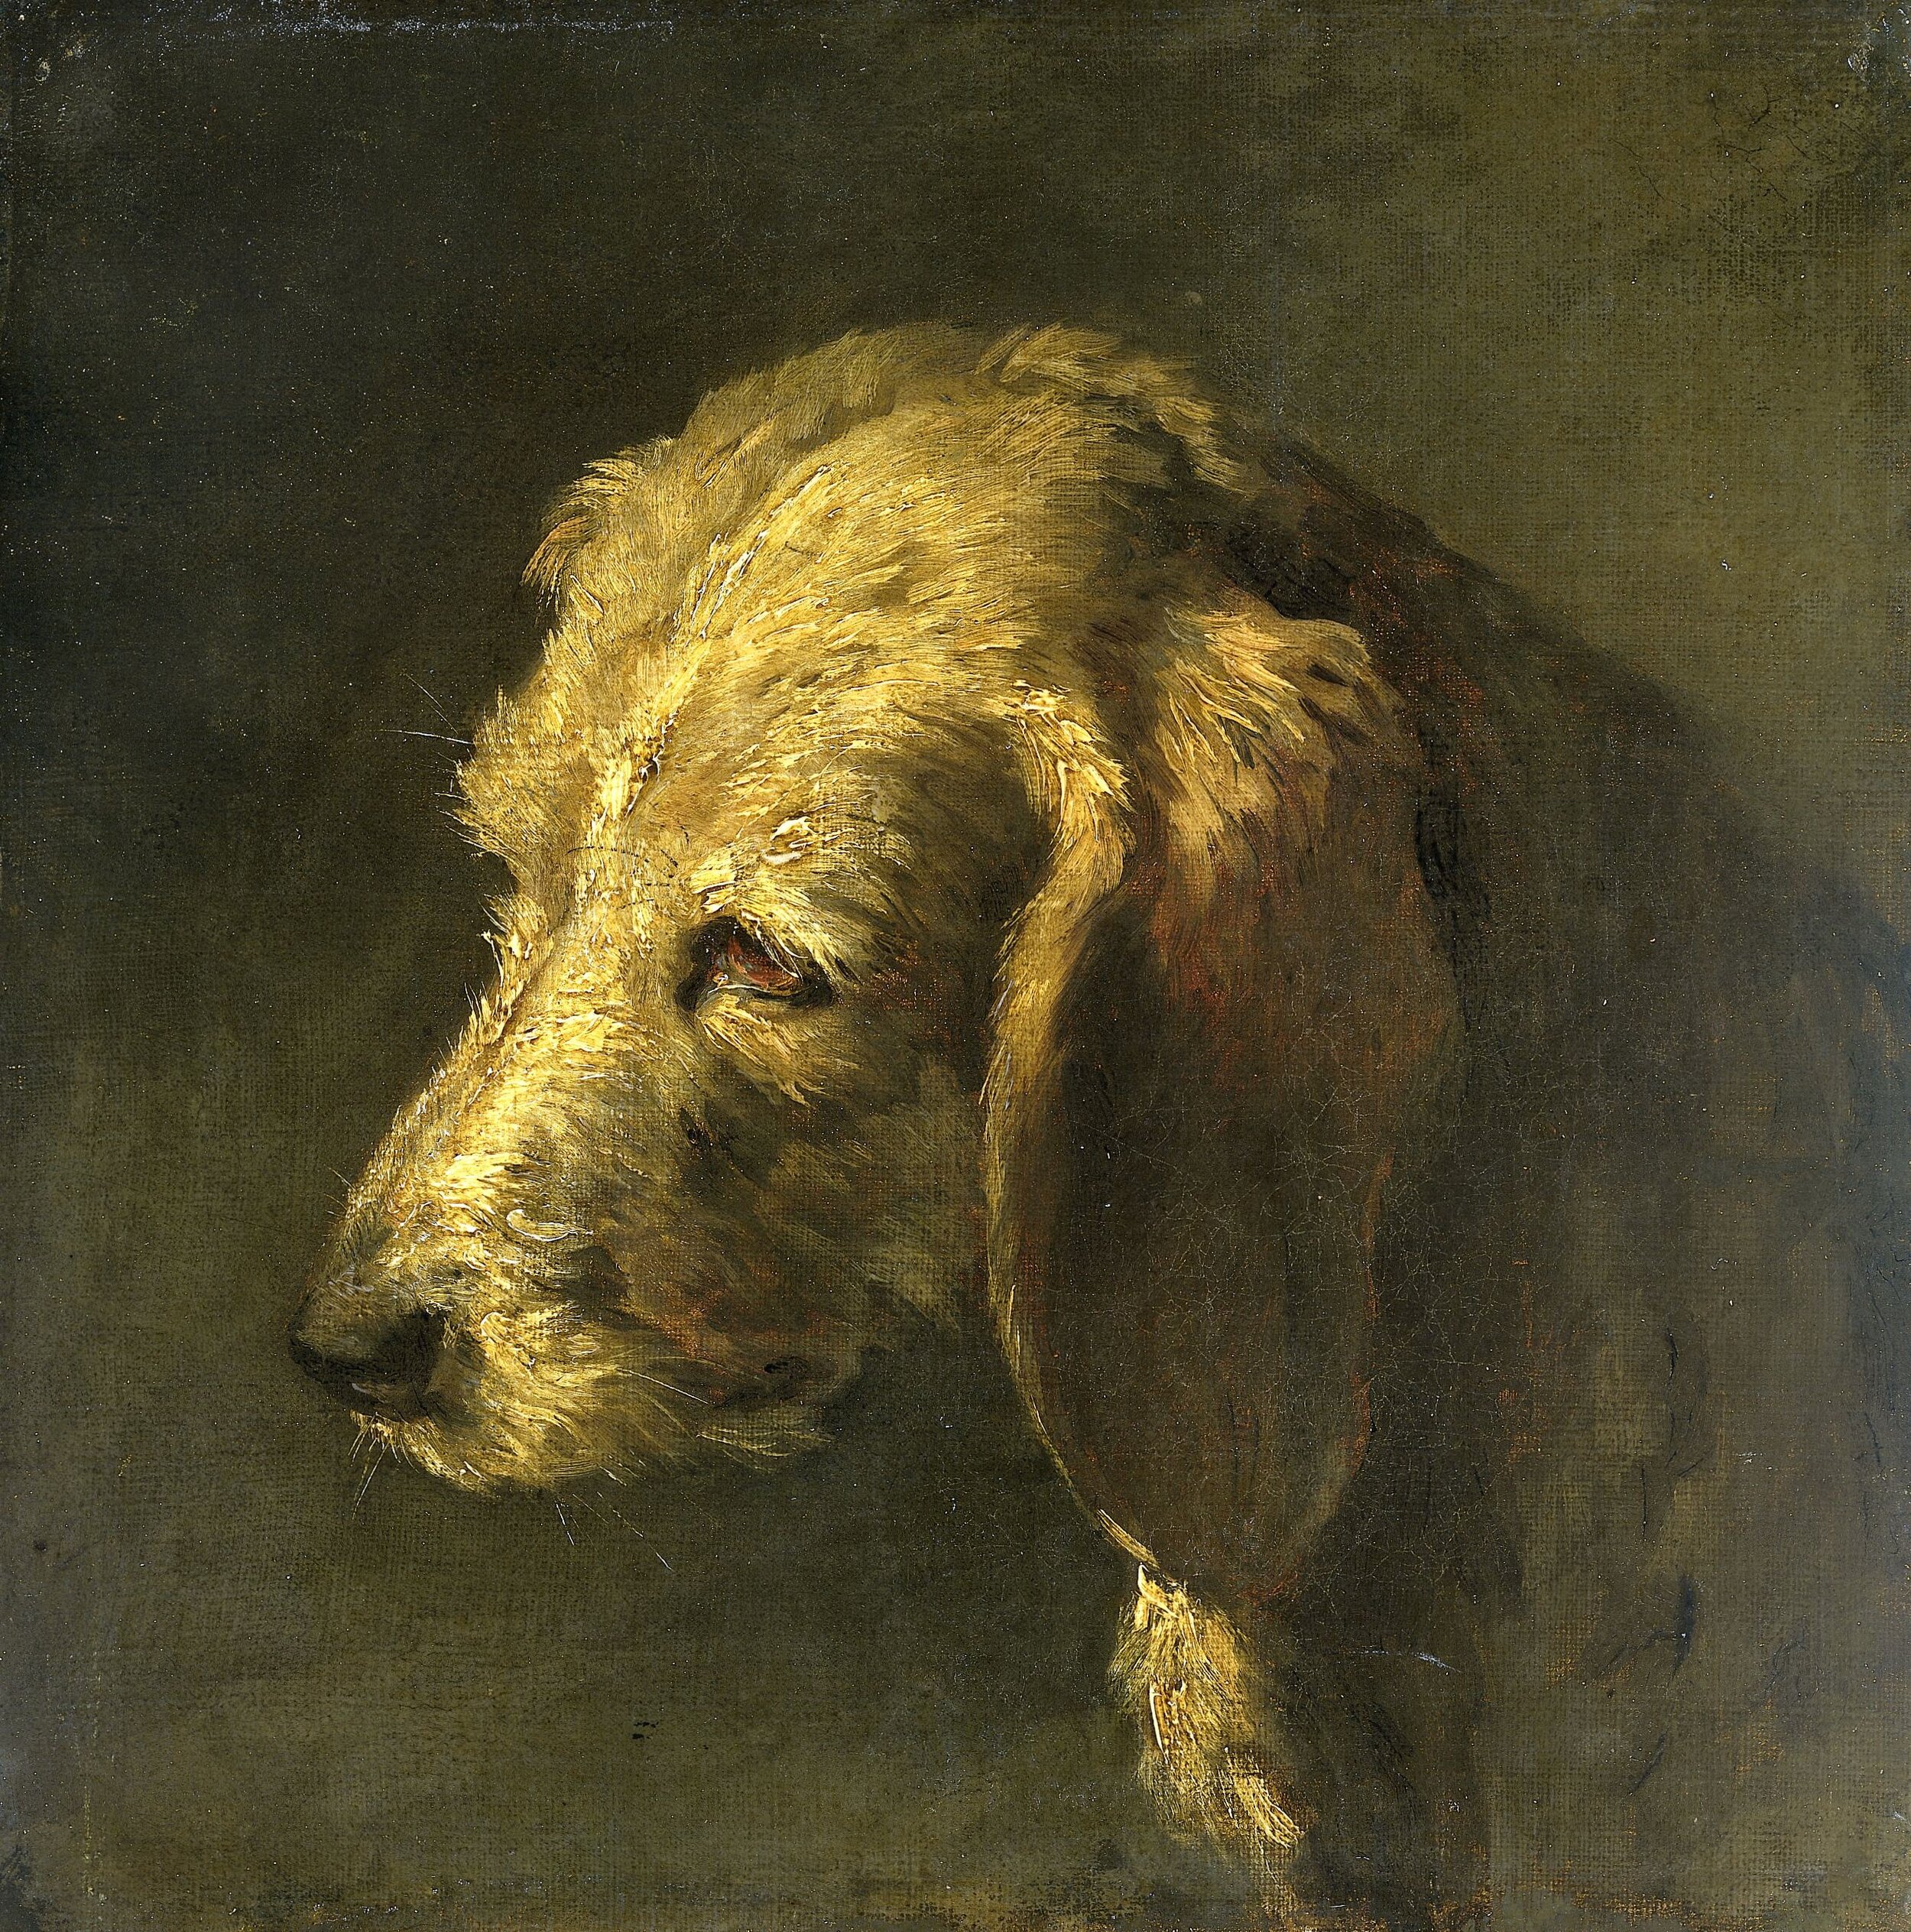 Head of a Dog, Nicolas Toussaint Charlet (attributed to), c. 1820 - c. 1845